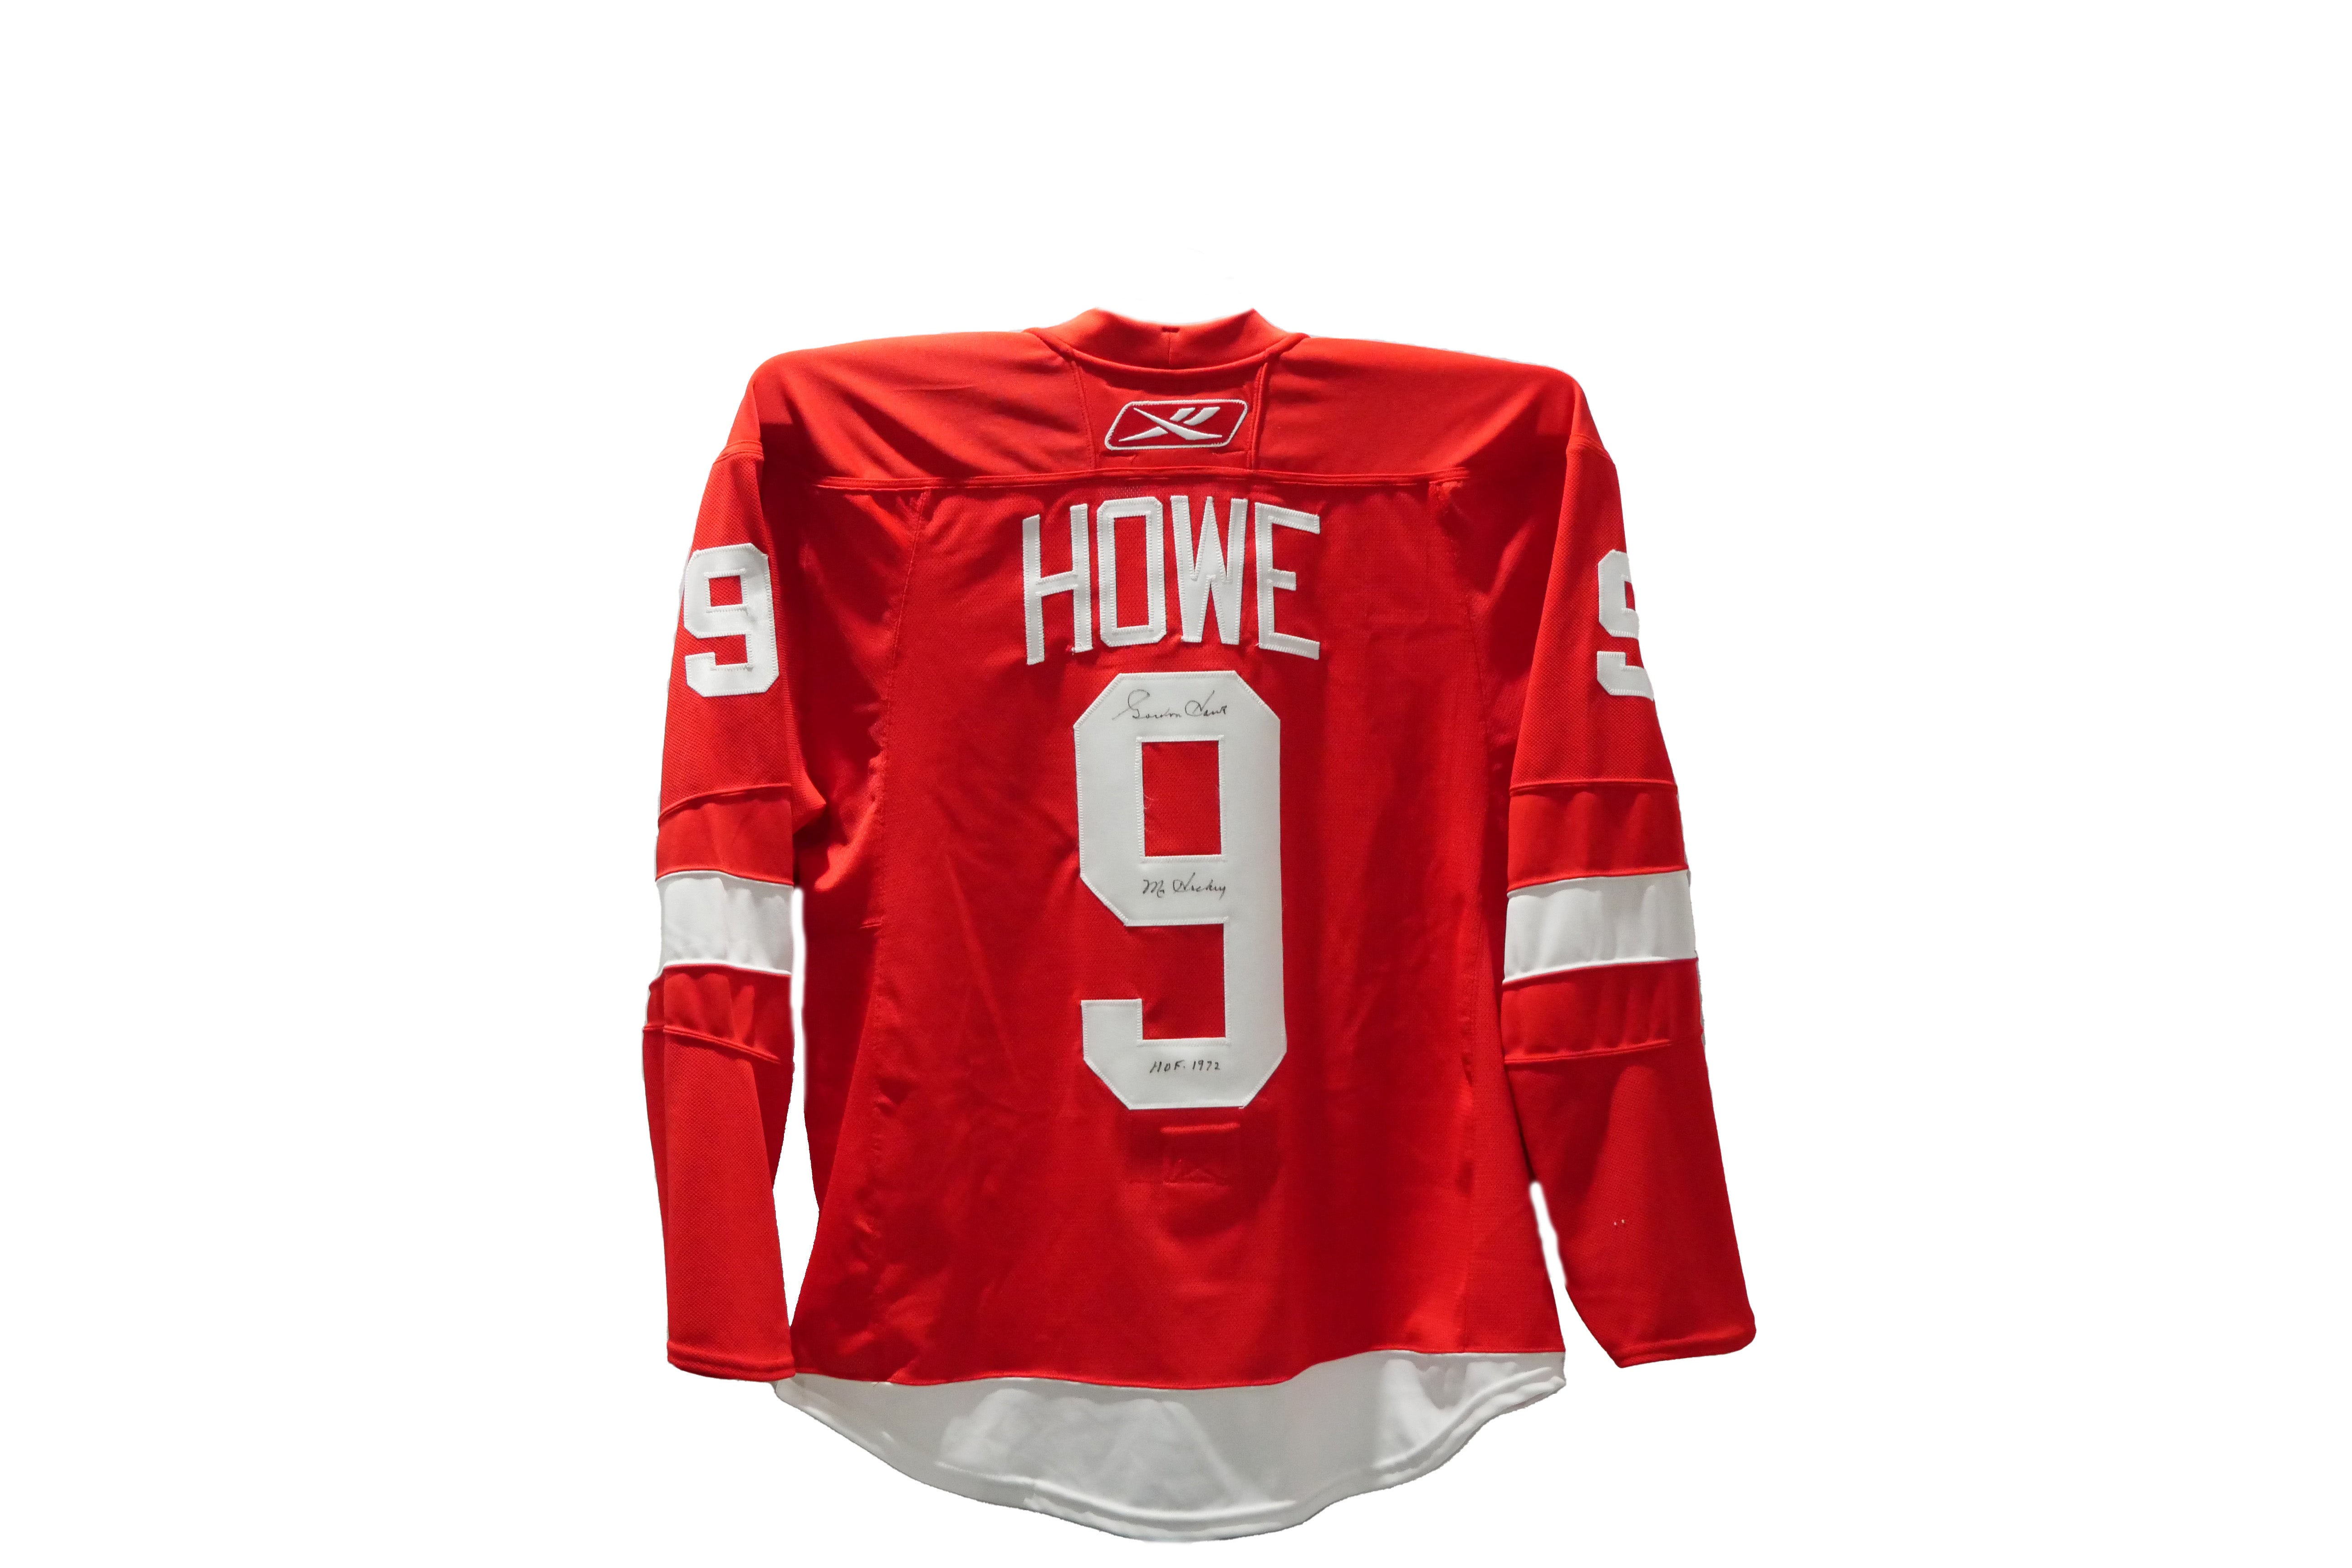 Gordie Howe Authentic Autographed Detroit Redwings Home Jersey